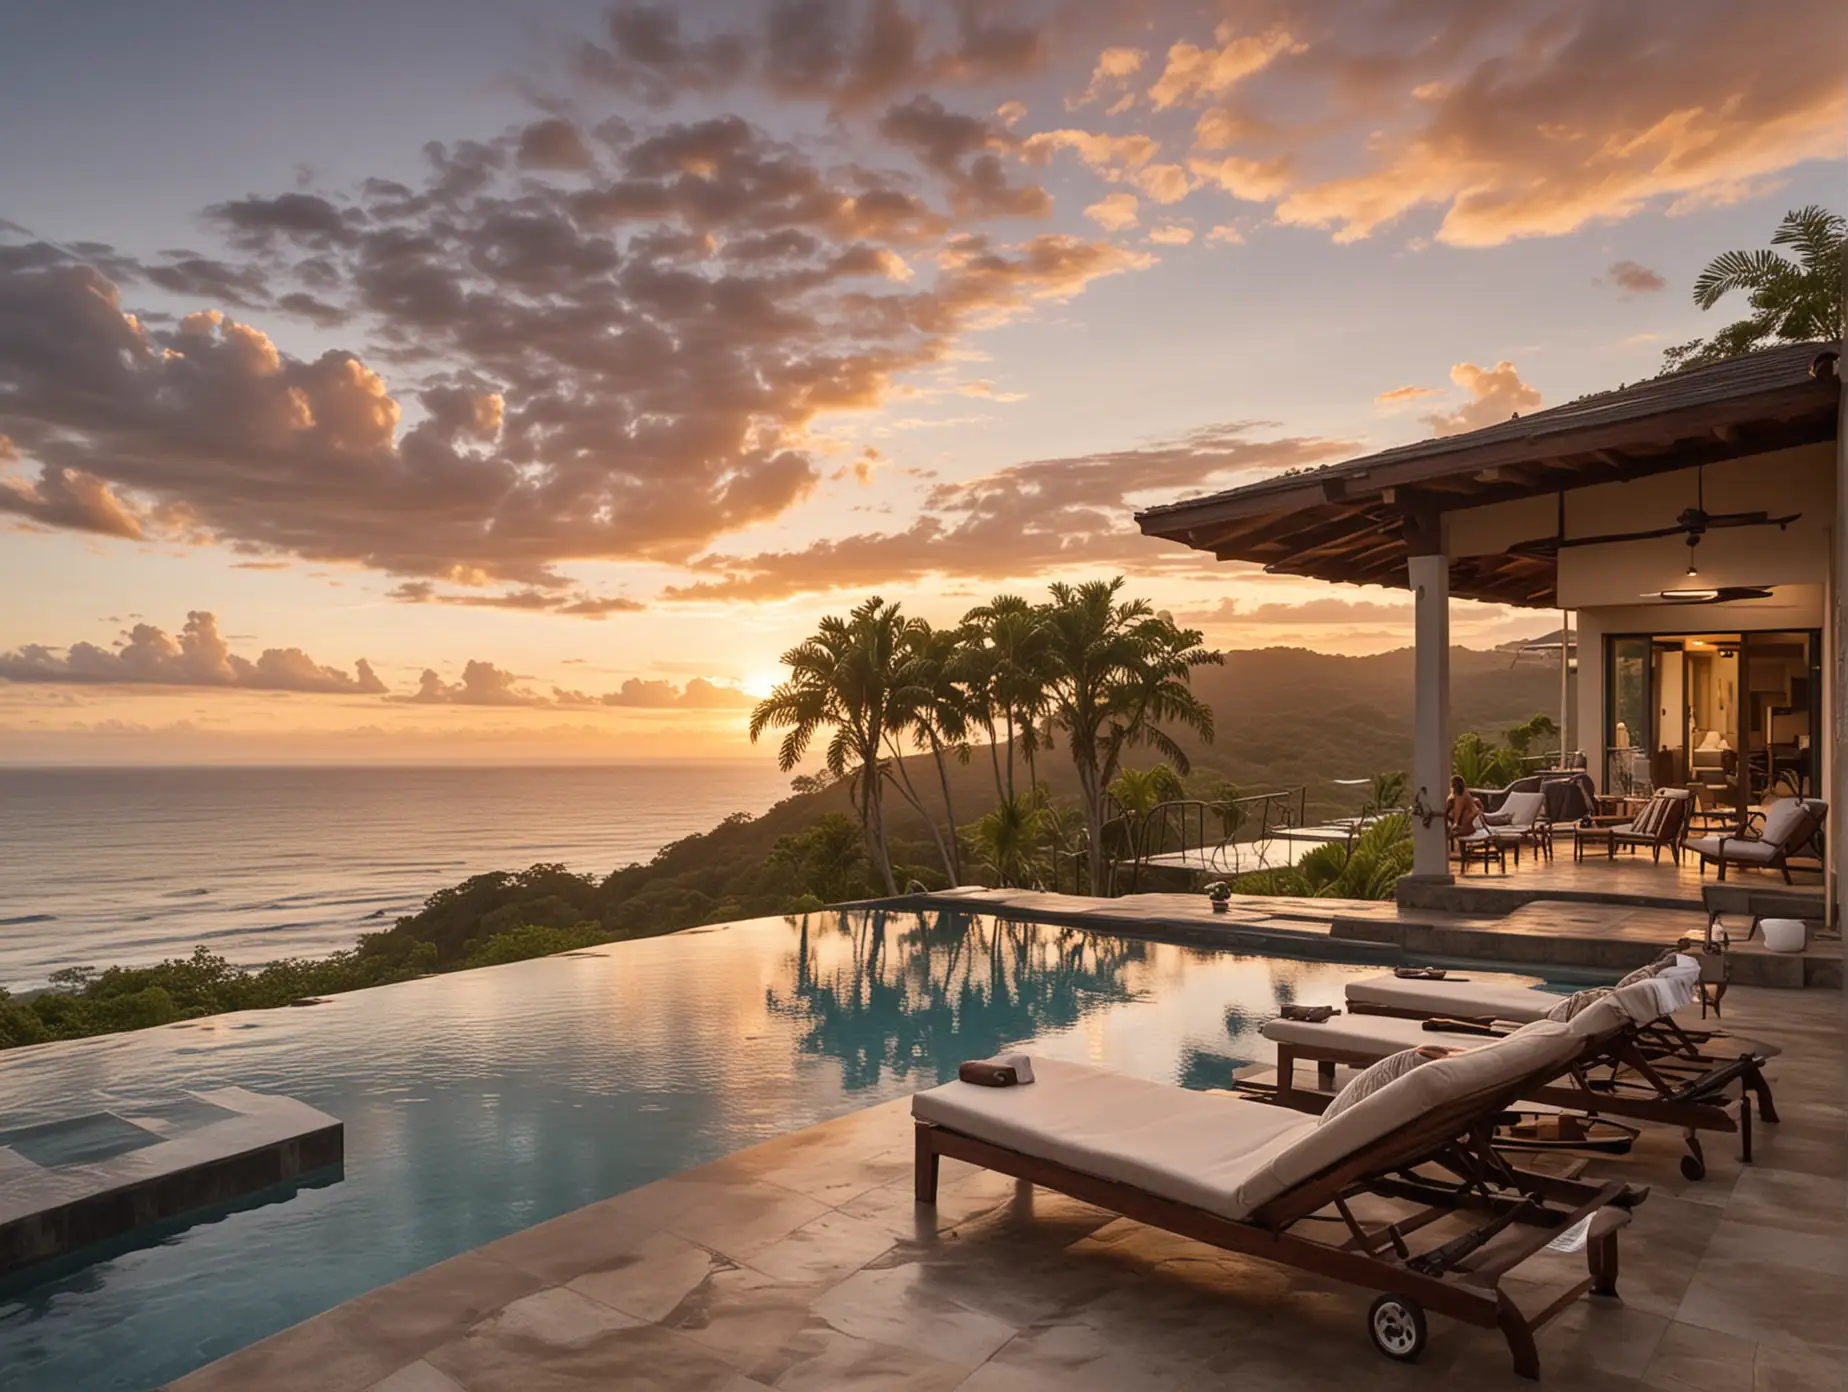 Luxury Costa Rica Home with Infinity Pool and Ocean View at Sunrise